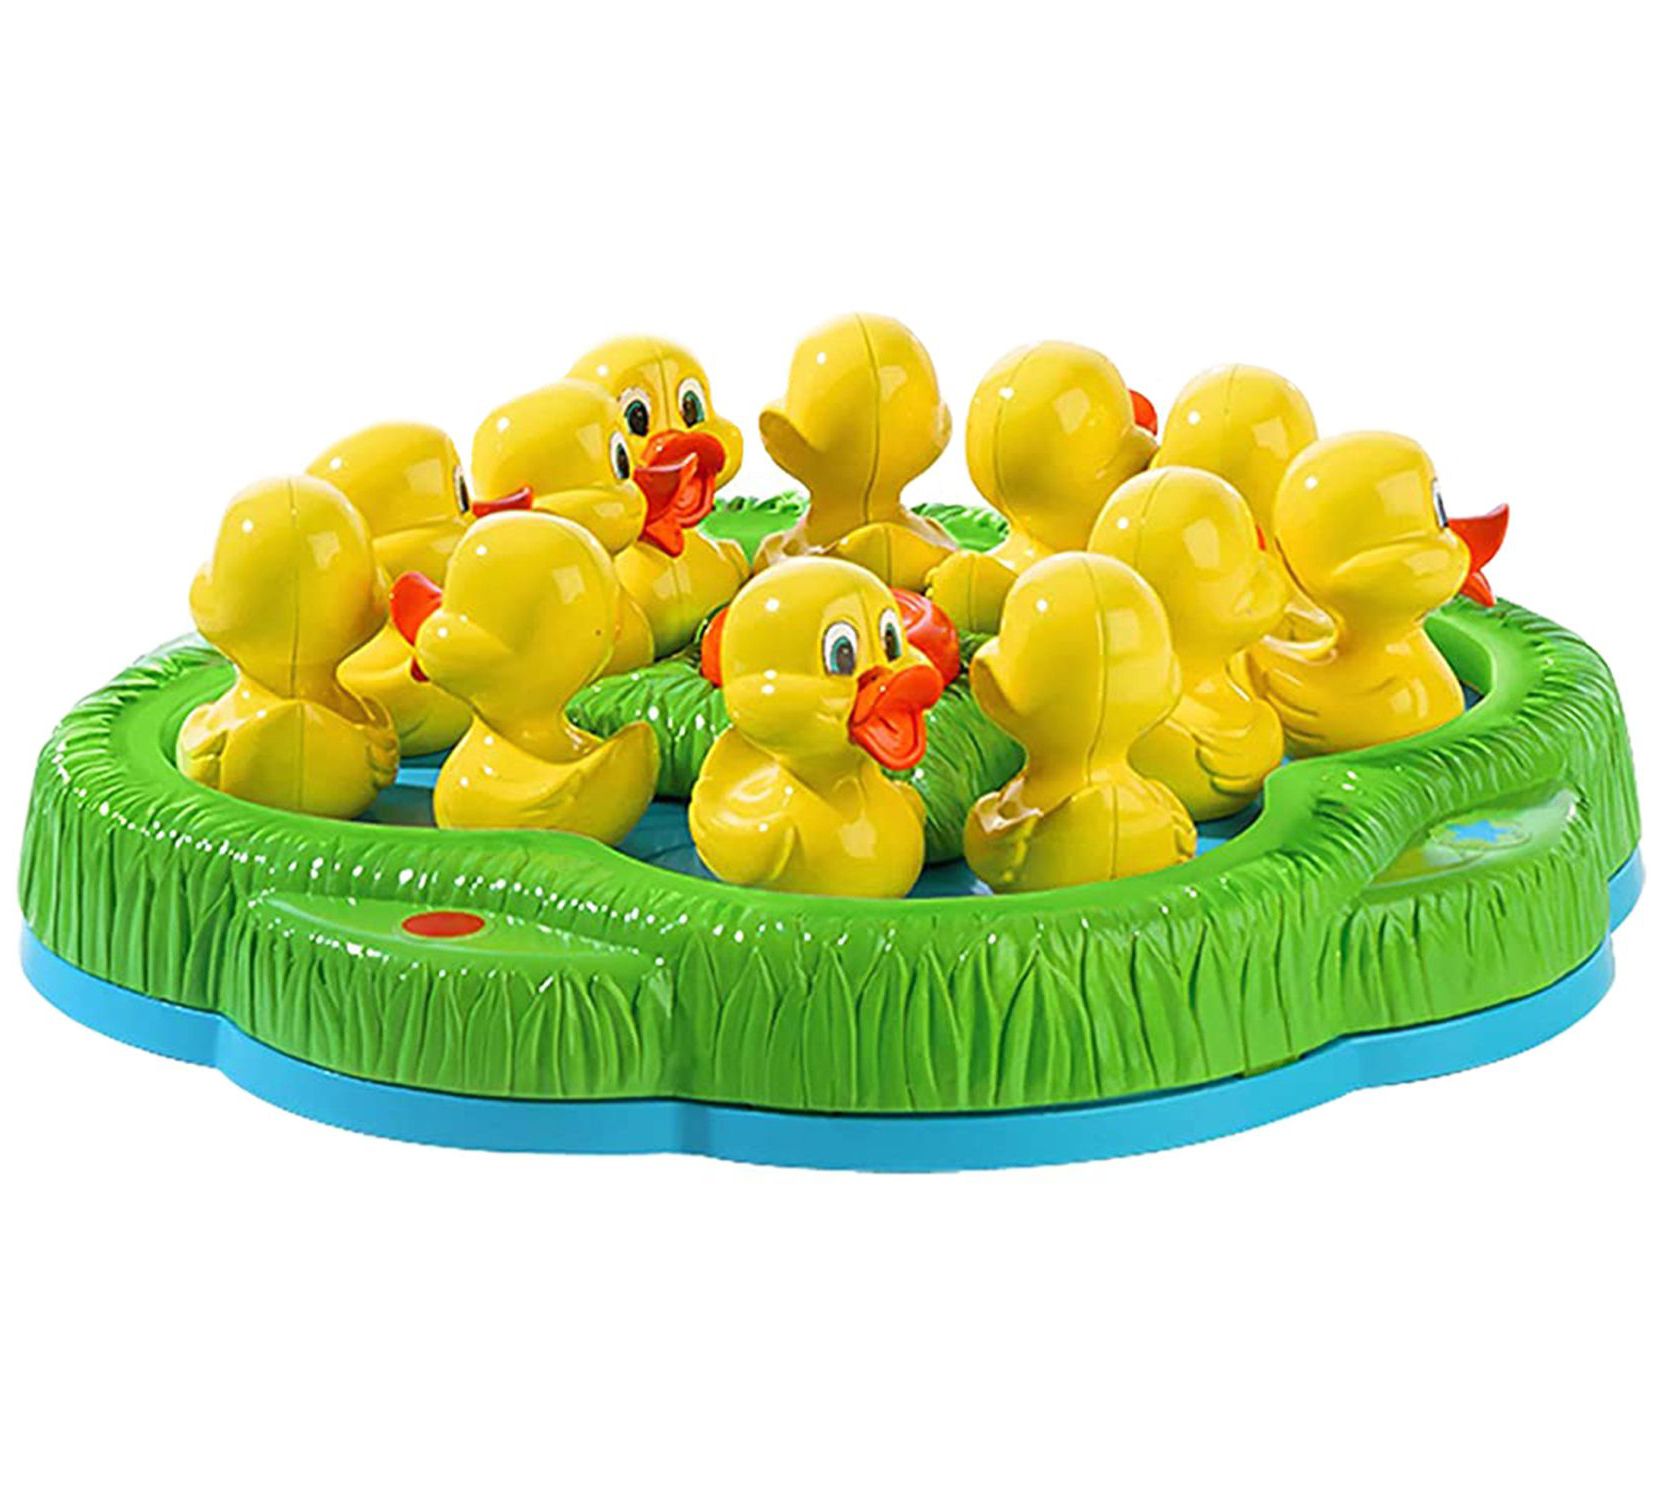 Pressman Toy Lucky Ducks Game for Kids Ages 3 and Up 